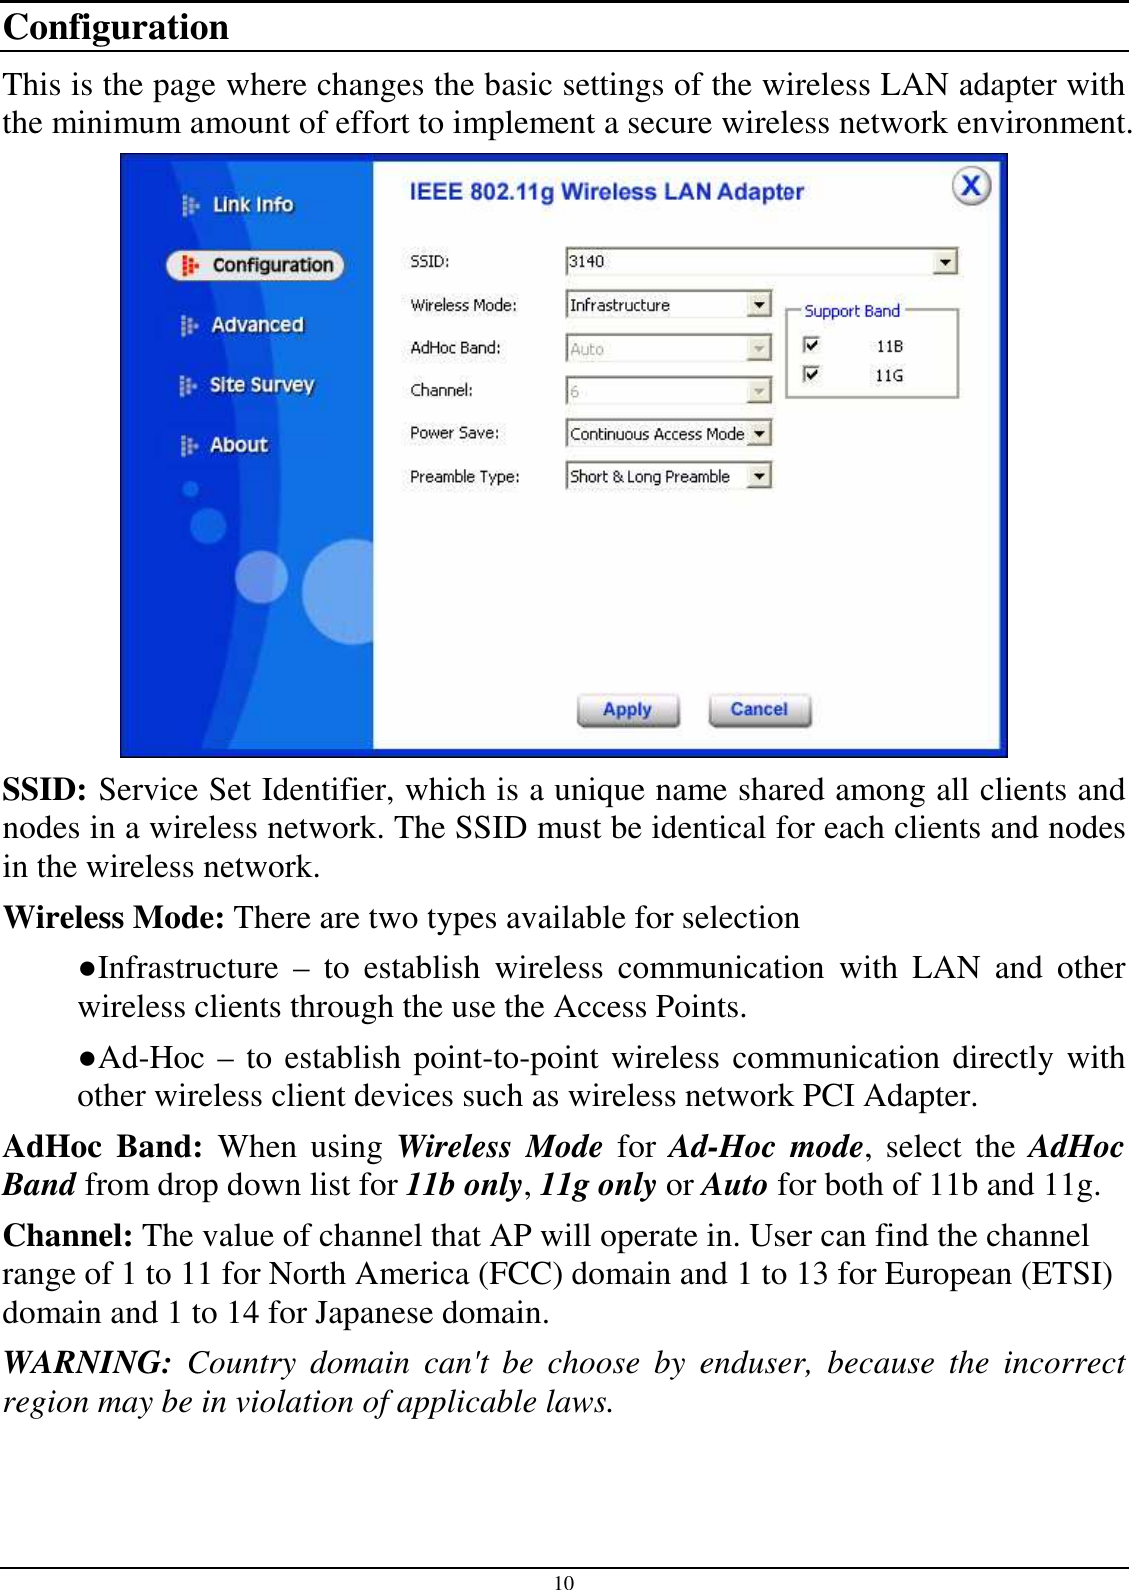 10 Configuration This is the page where changes the basic settings of the wireless LAN adapter with the minimum amount of effort to implement a secure wireless network environment.  SSID: Service Set Identifier, which is a unique name shared among all clients and nodes in a wireless network. The SSID must be identical for each clients and nodes in the wireless network. Wireless Mode: There are two types available for selection ●Infrastructure  –  to  establish  wireless  communication  with  LAN  and  other wireless clients through the use the Access Points. ●Ad-Hoc – to establish point-to-point wireless communication directly with other wireless client devices such as wireless network PCI Adapter. AdHoc  Band:  When  using  Wireless Mode  for  Ad-Hoc mode,  select  the  AdHoc Band from drop down list for 11b only, 11g only or Auto for both of 11b and 11g. Channel: The value of channel that AP will operate in. User can find the channel range of 1 to 11 for North America (FCC) domain and 1 to 13 for European (ETSI) domain and 1 to 14 for Japanese domain.  WARNING:  Country  domain  can&apos;t  be  choose  by  enduser,  because  the  incorrect region may be in violation of applicable laws.  